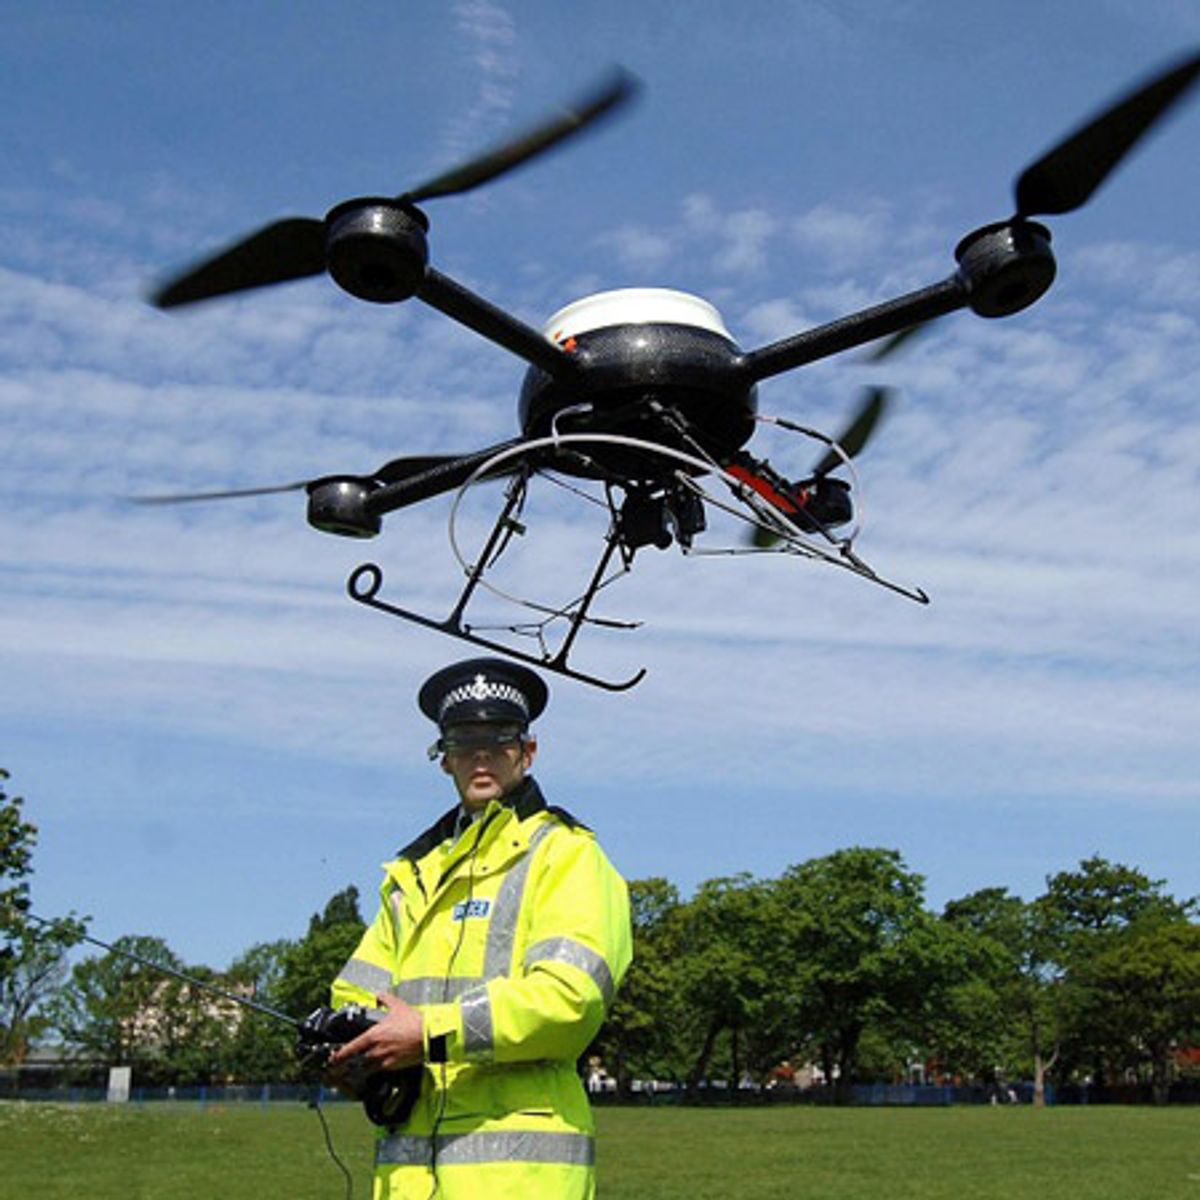 Homeland Security Wants Drones for Public Safety, Doesn't Want to Tell Public About Them